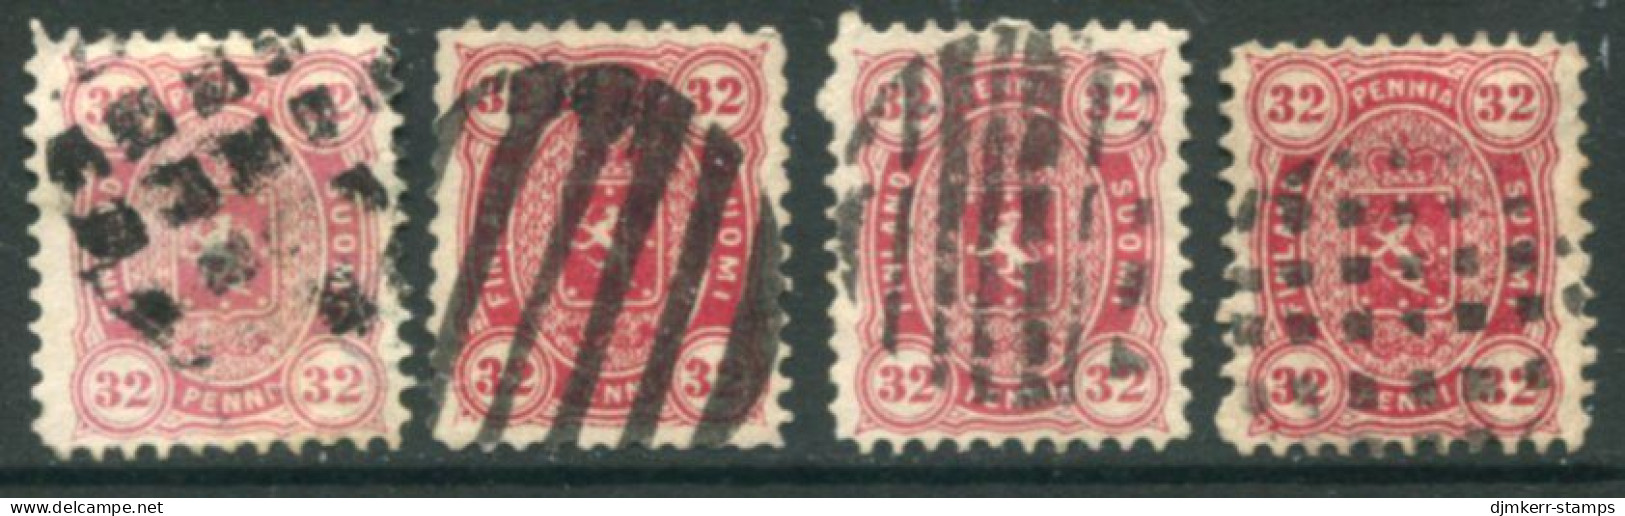 FINLAND 1875 32 P. Perforated 11 Used With Cork Or Wooden Cancellers (4).  Michel 18 Ax-y - Gebraucht